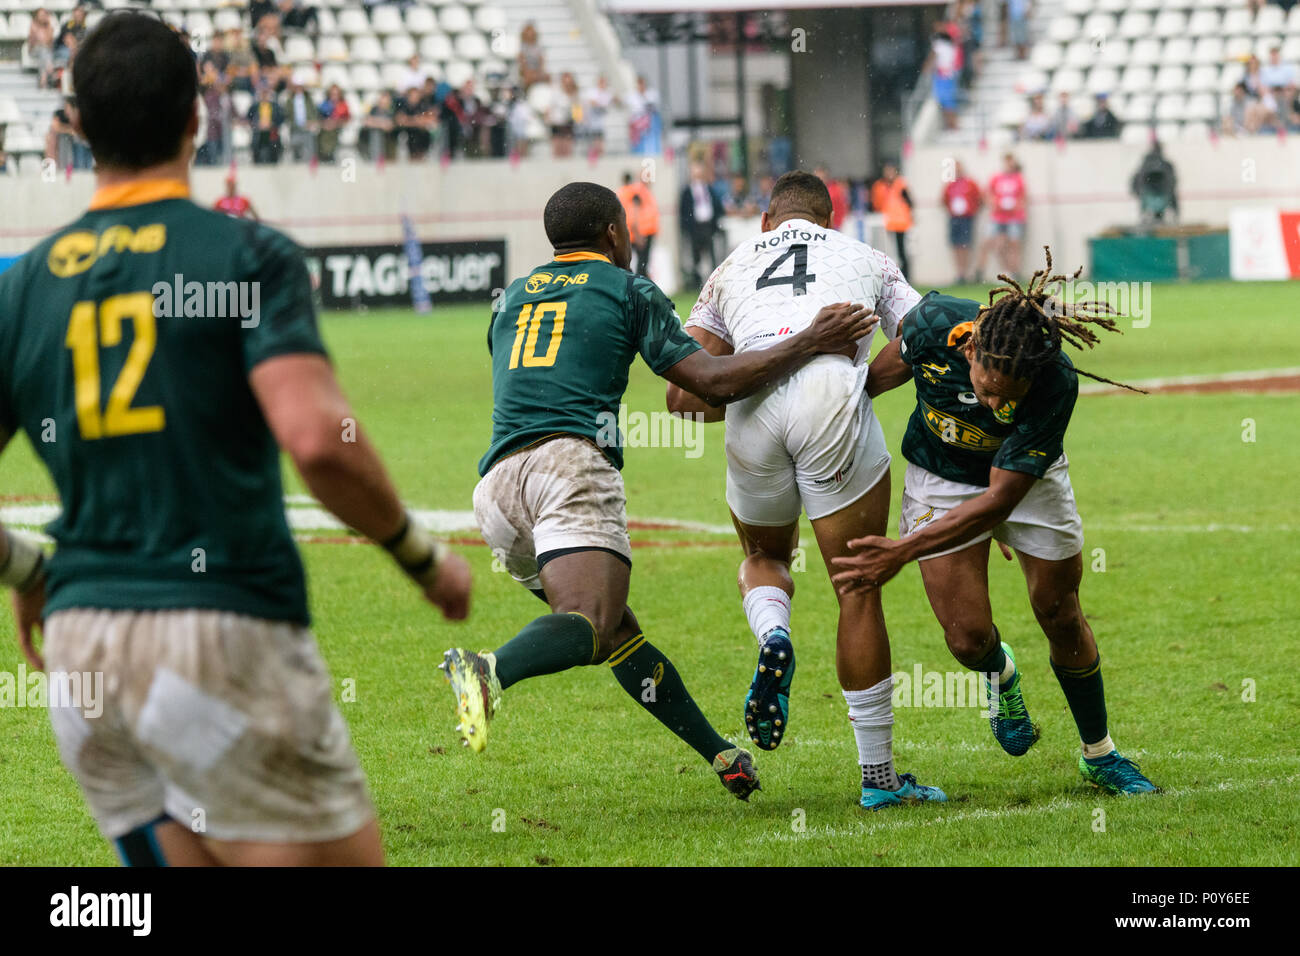 Paris, France. 10th Jun, 2018. England offense (here Dan Norton) has hard time going through South Africa defense during the loss in final of the HSBC Paris Sevens Series. South Africa will win both the tournament and the 2018 Sevens World Series, Paris, France, June 10th 2018. Stock Photo